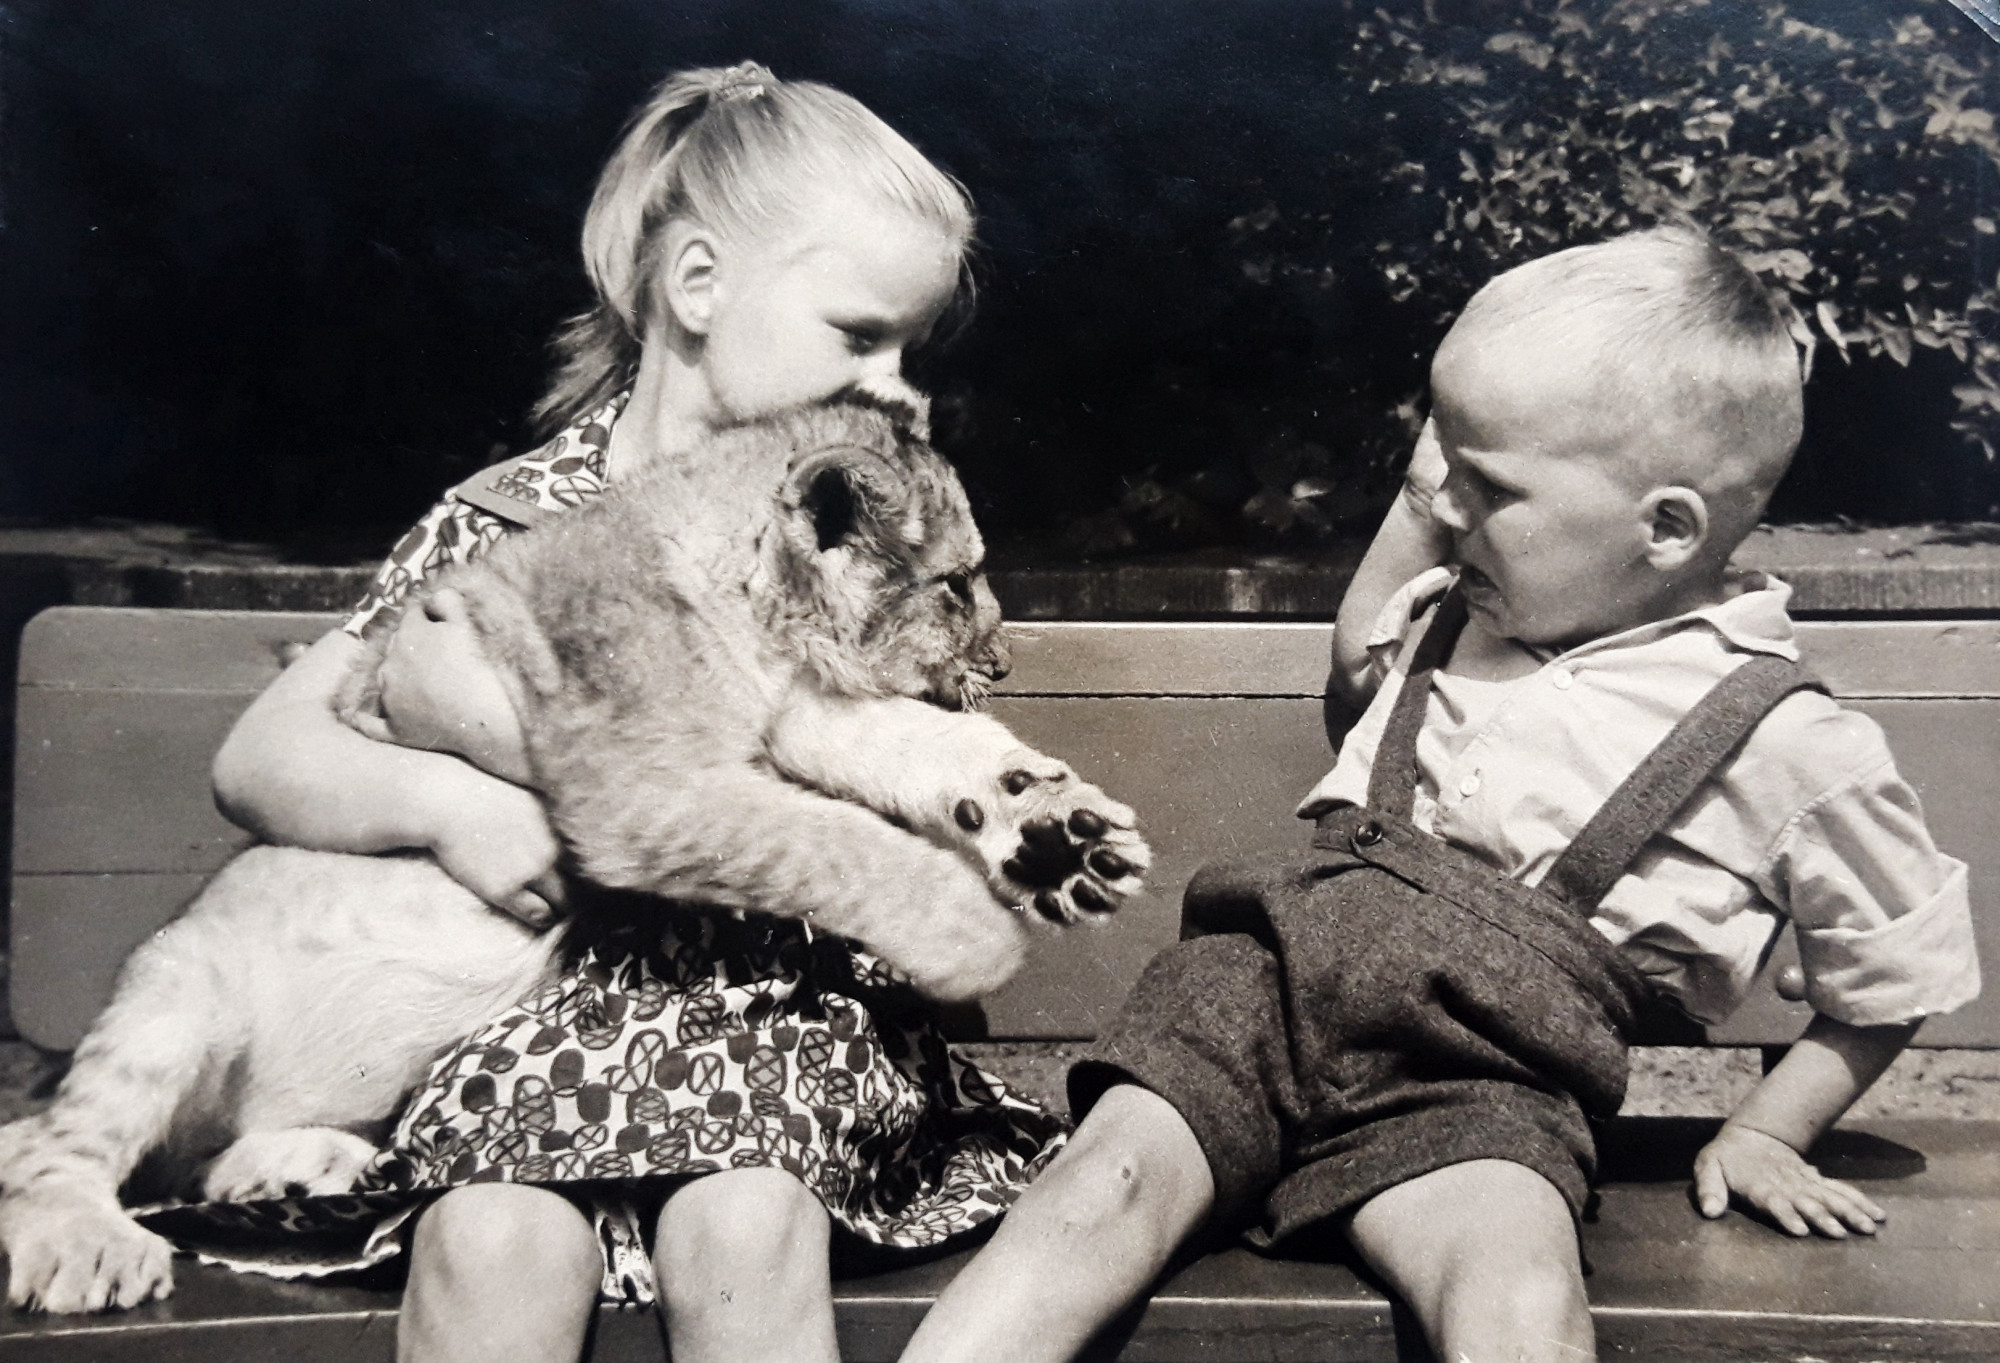 A young girl and a boy sit on a bench. The girl uses both arms to hold a lion cub towards the boy, who shrinks back with fearful facial expressions and body language.